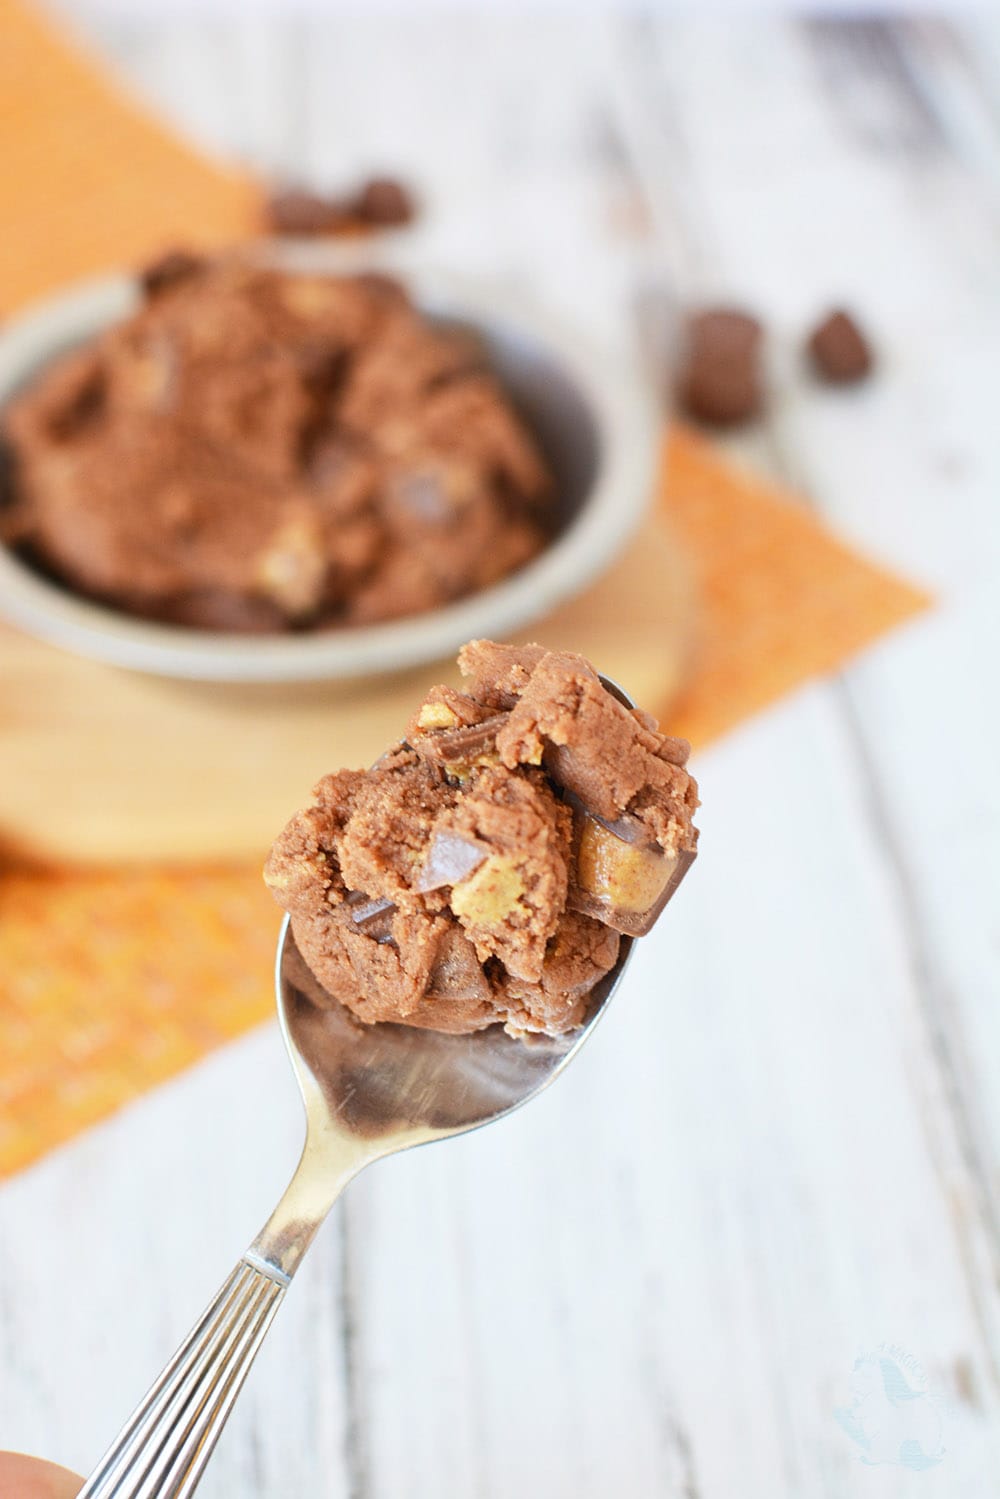 Chocolate peanut butter cookie dough to use as a dip or eat with a spoon